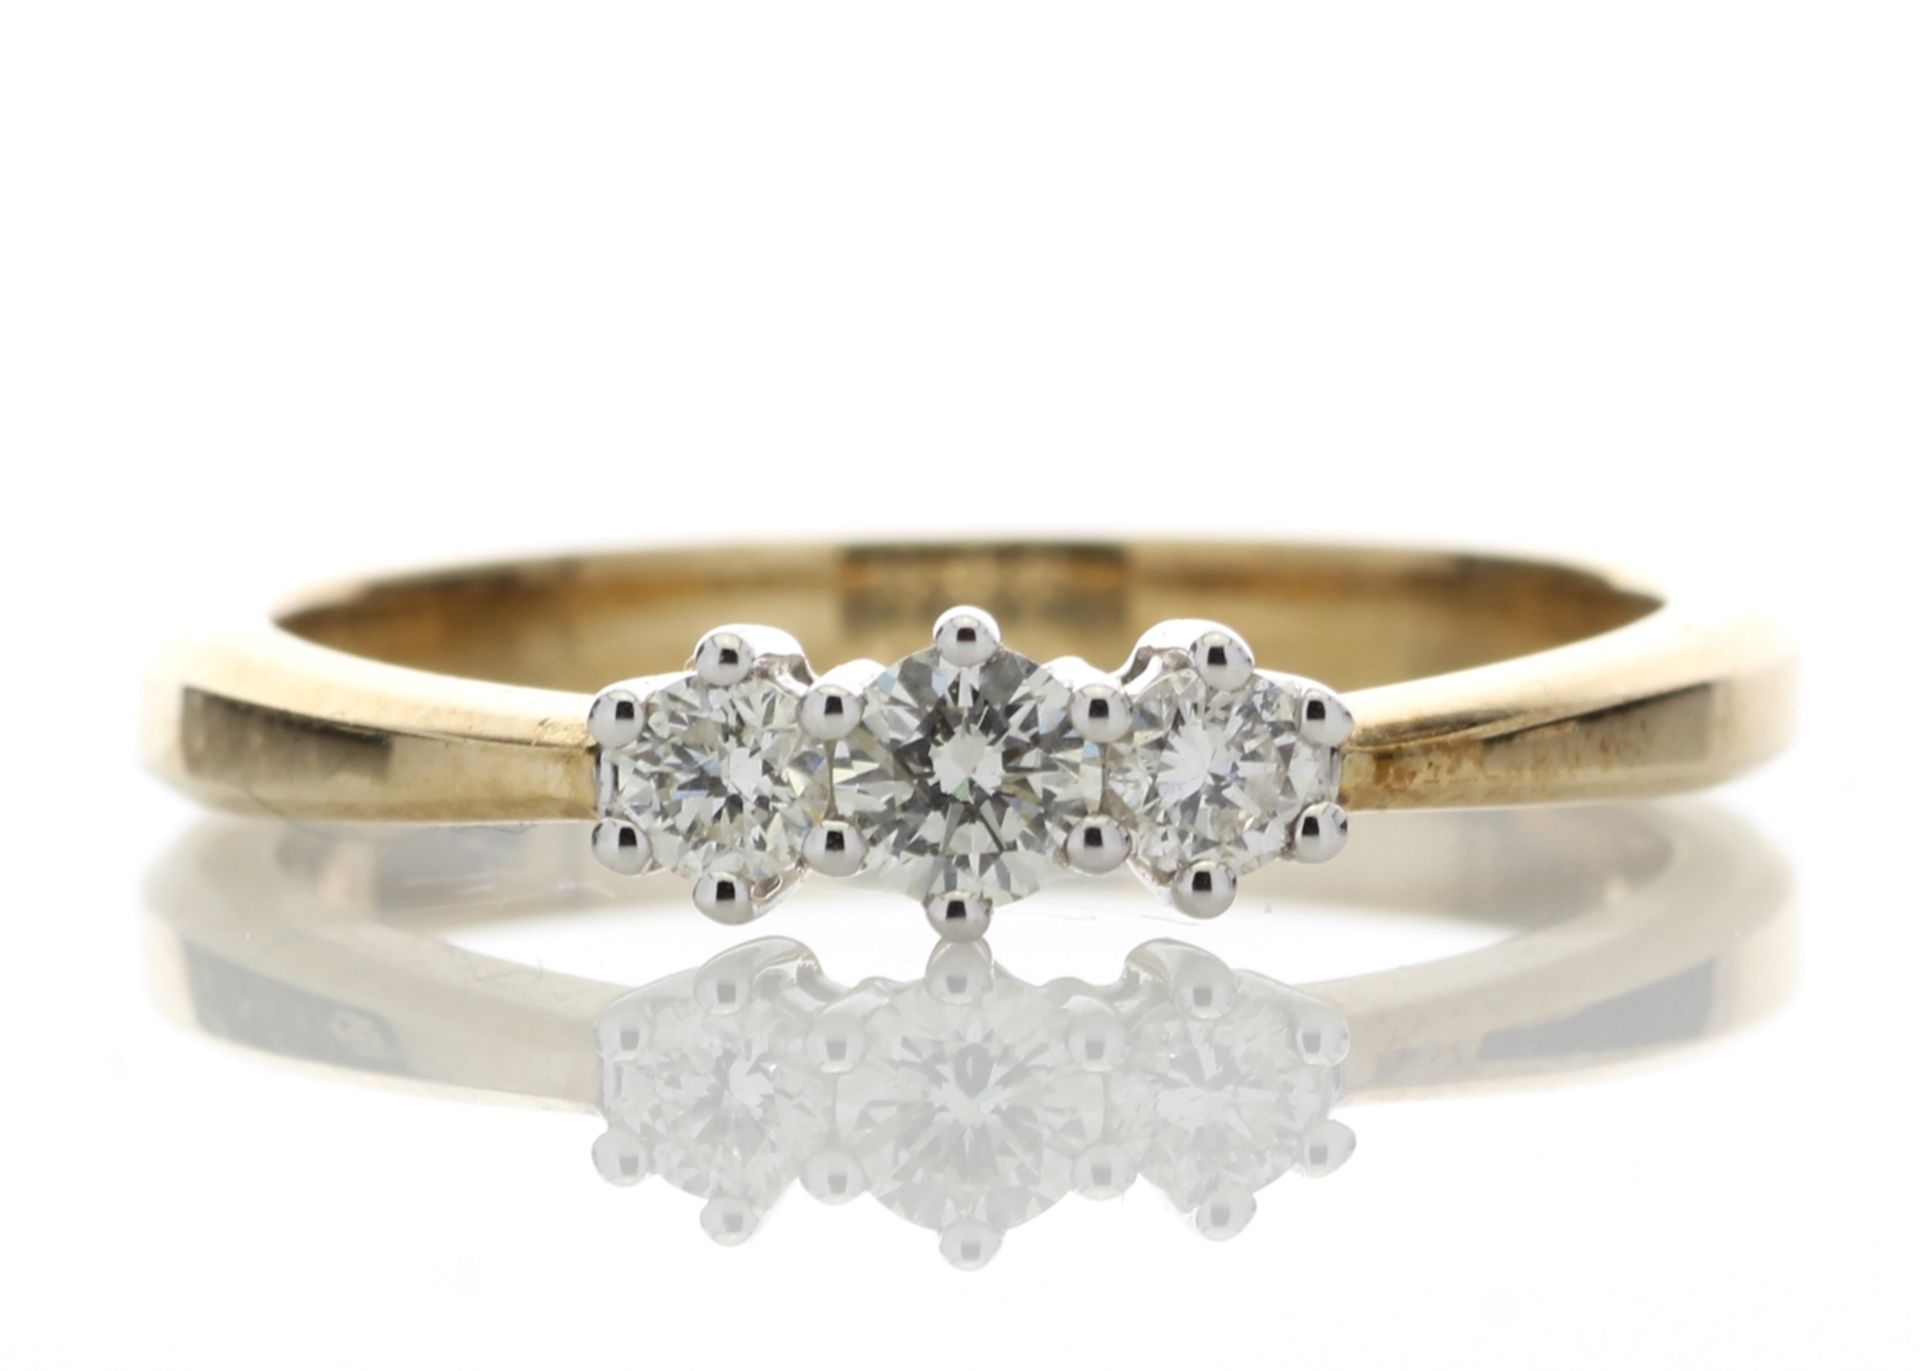 18ct Yellow Gold Three Stone Diamond Ring 0.25 Carats - Valued By GIE £2,800.00 - Ten round